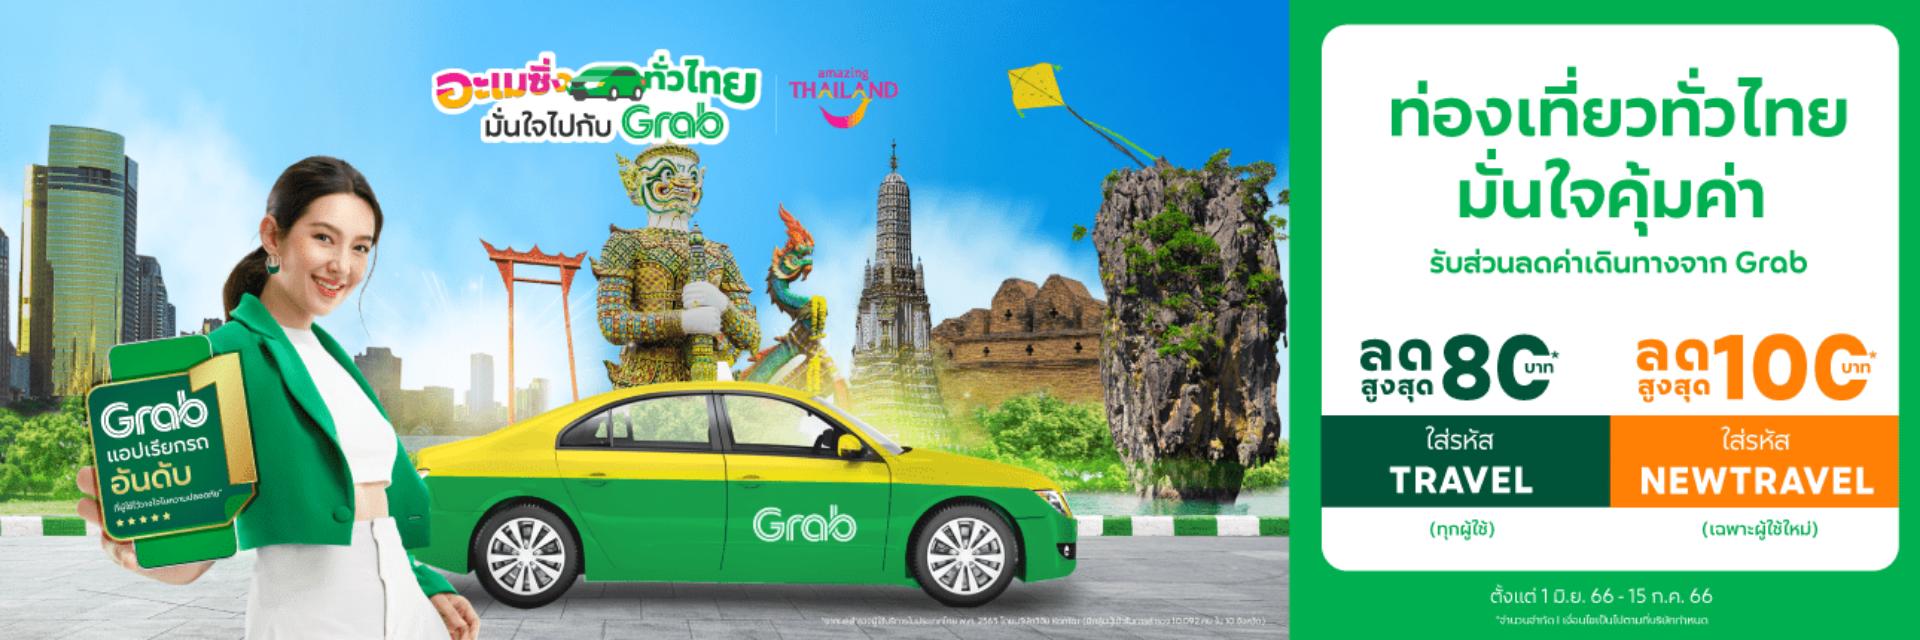 Amazing Thailand, Travel Confidently with Grab